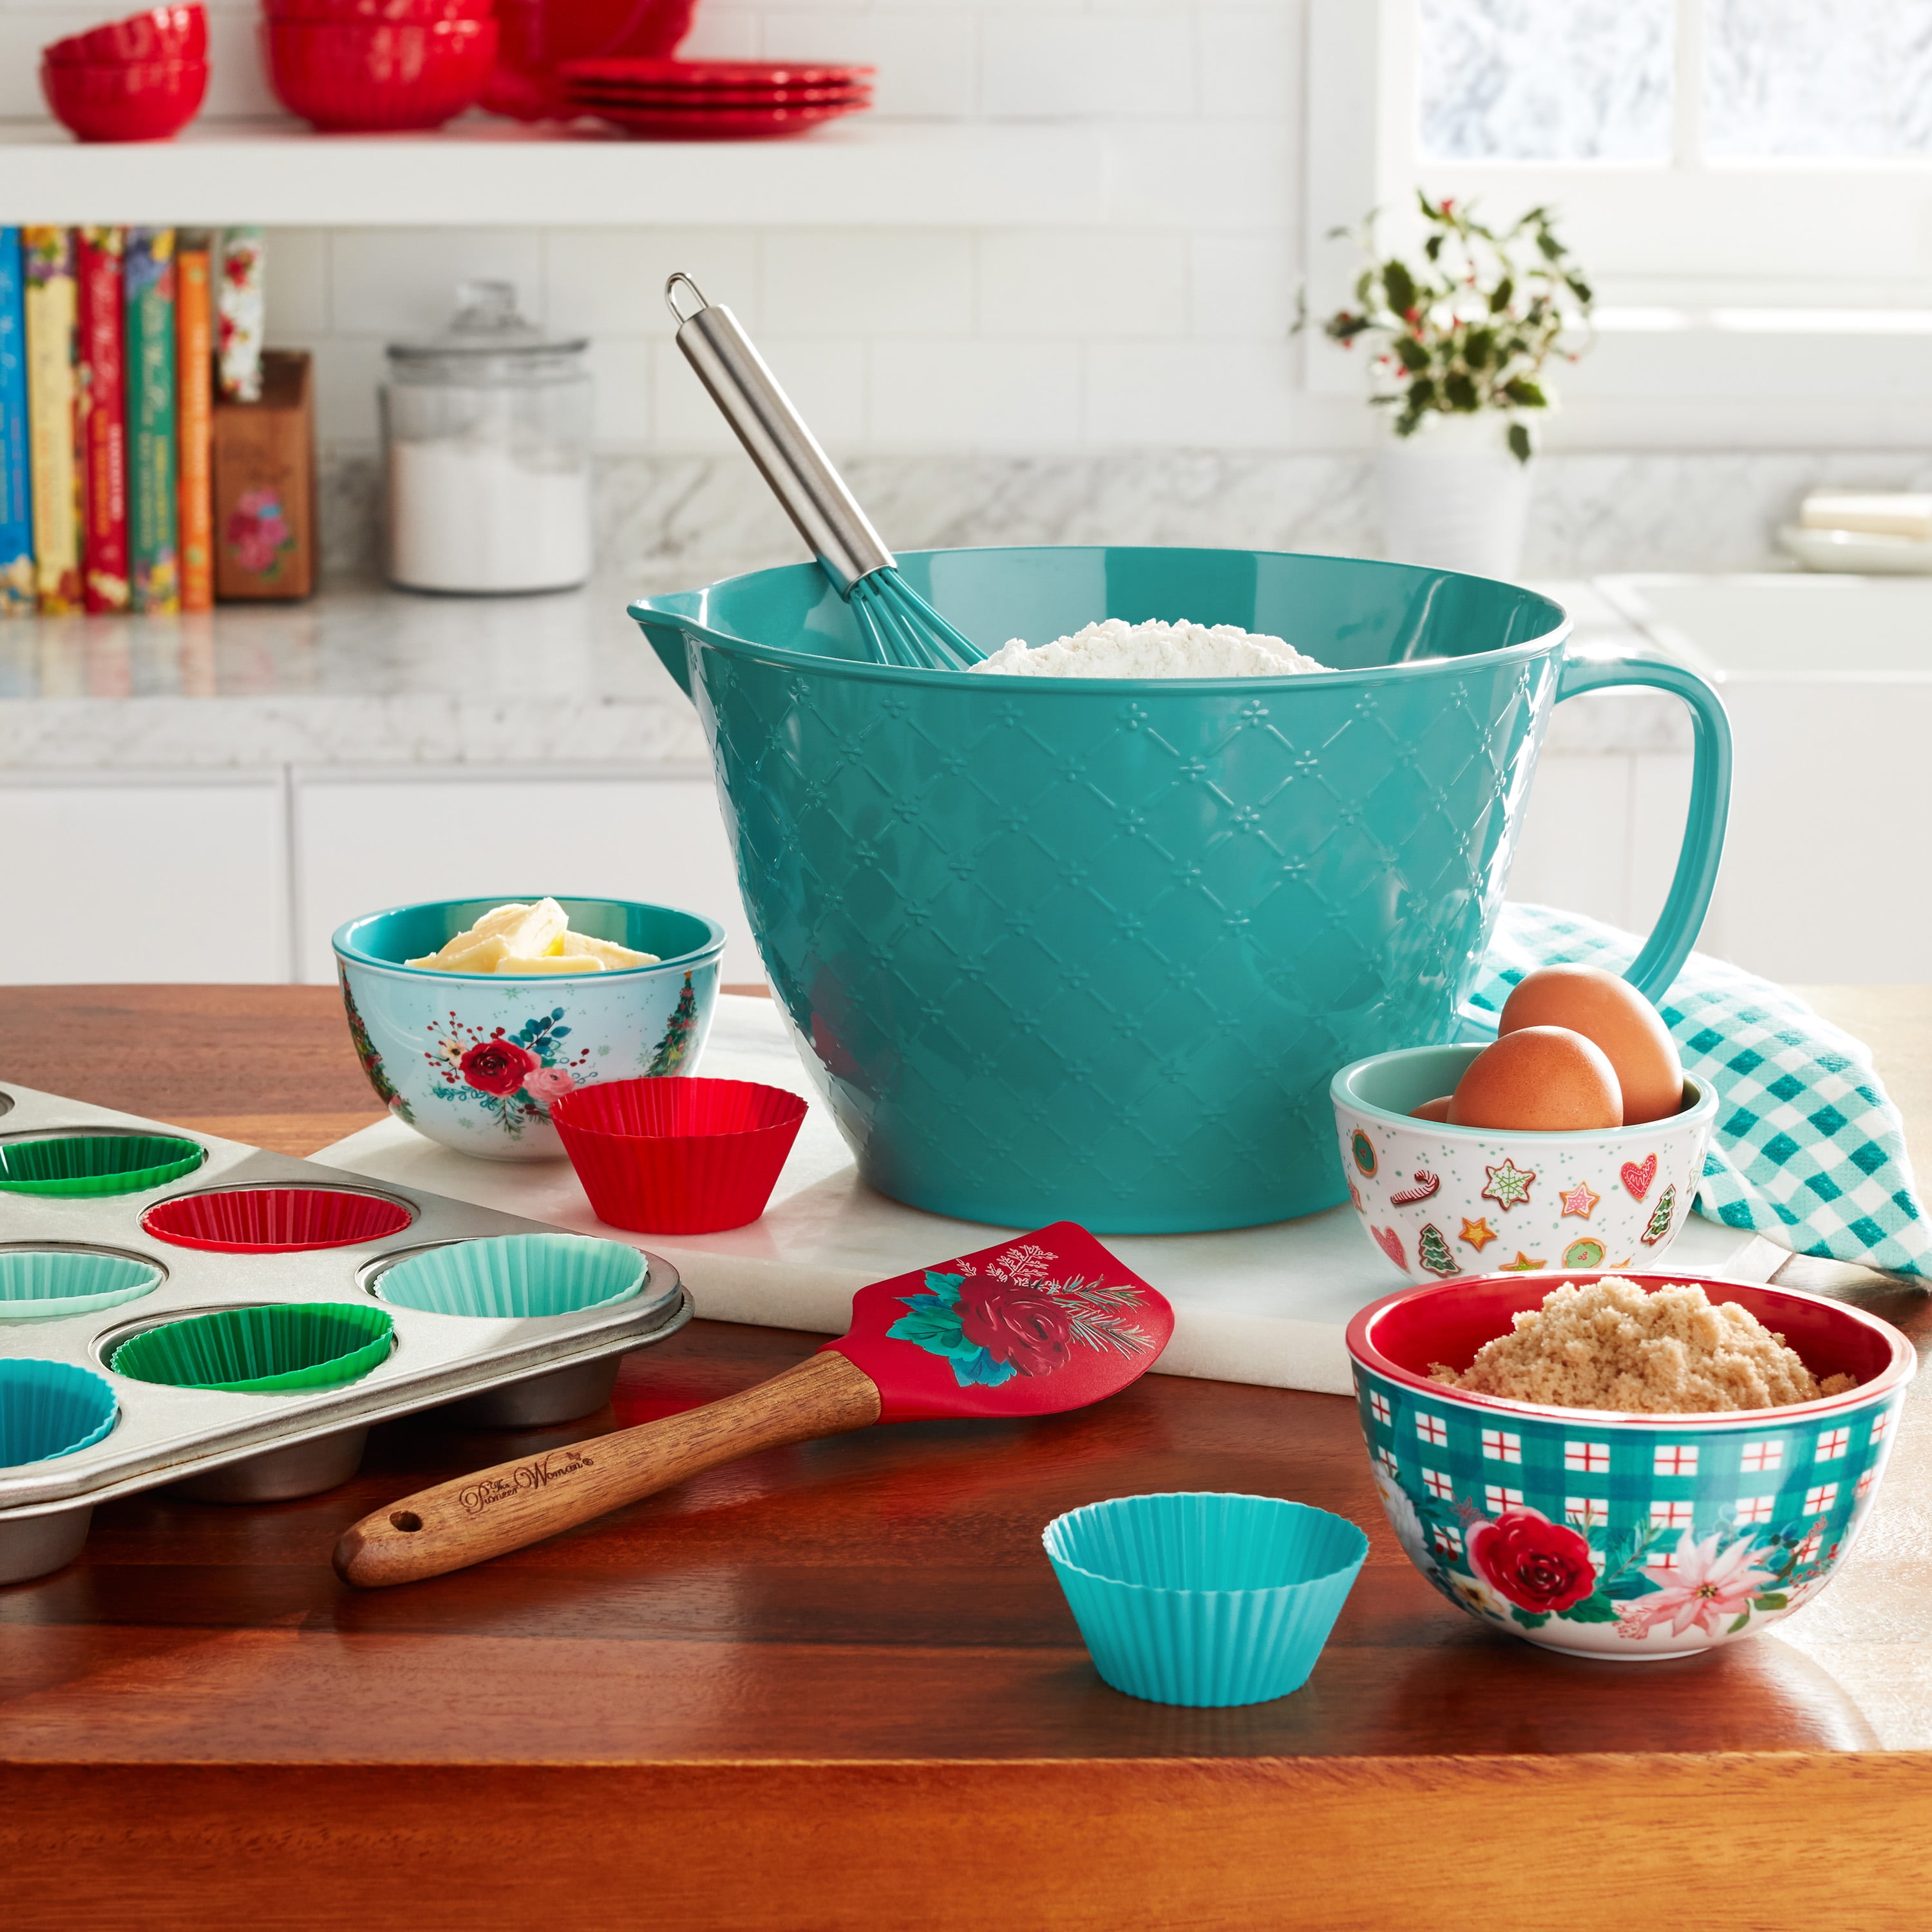 The Pioneer Woman Silicone Kitchen Utensils & Mixing Bowl Set, 14-Pieces, Teal, Wishful Winter, with Whisk, Spatula, 8 Cupcake Liners